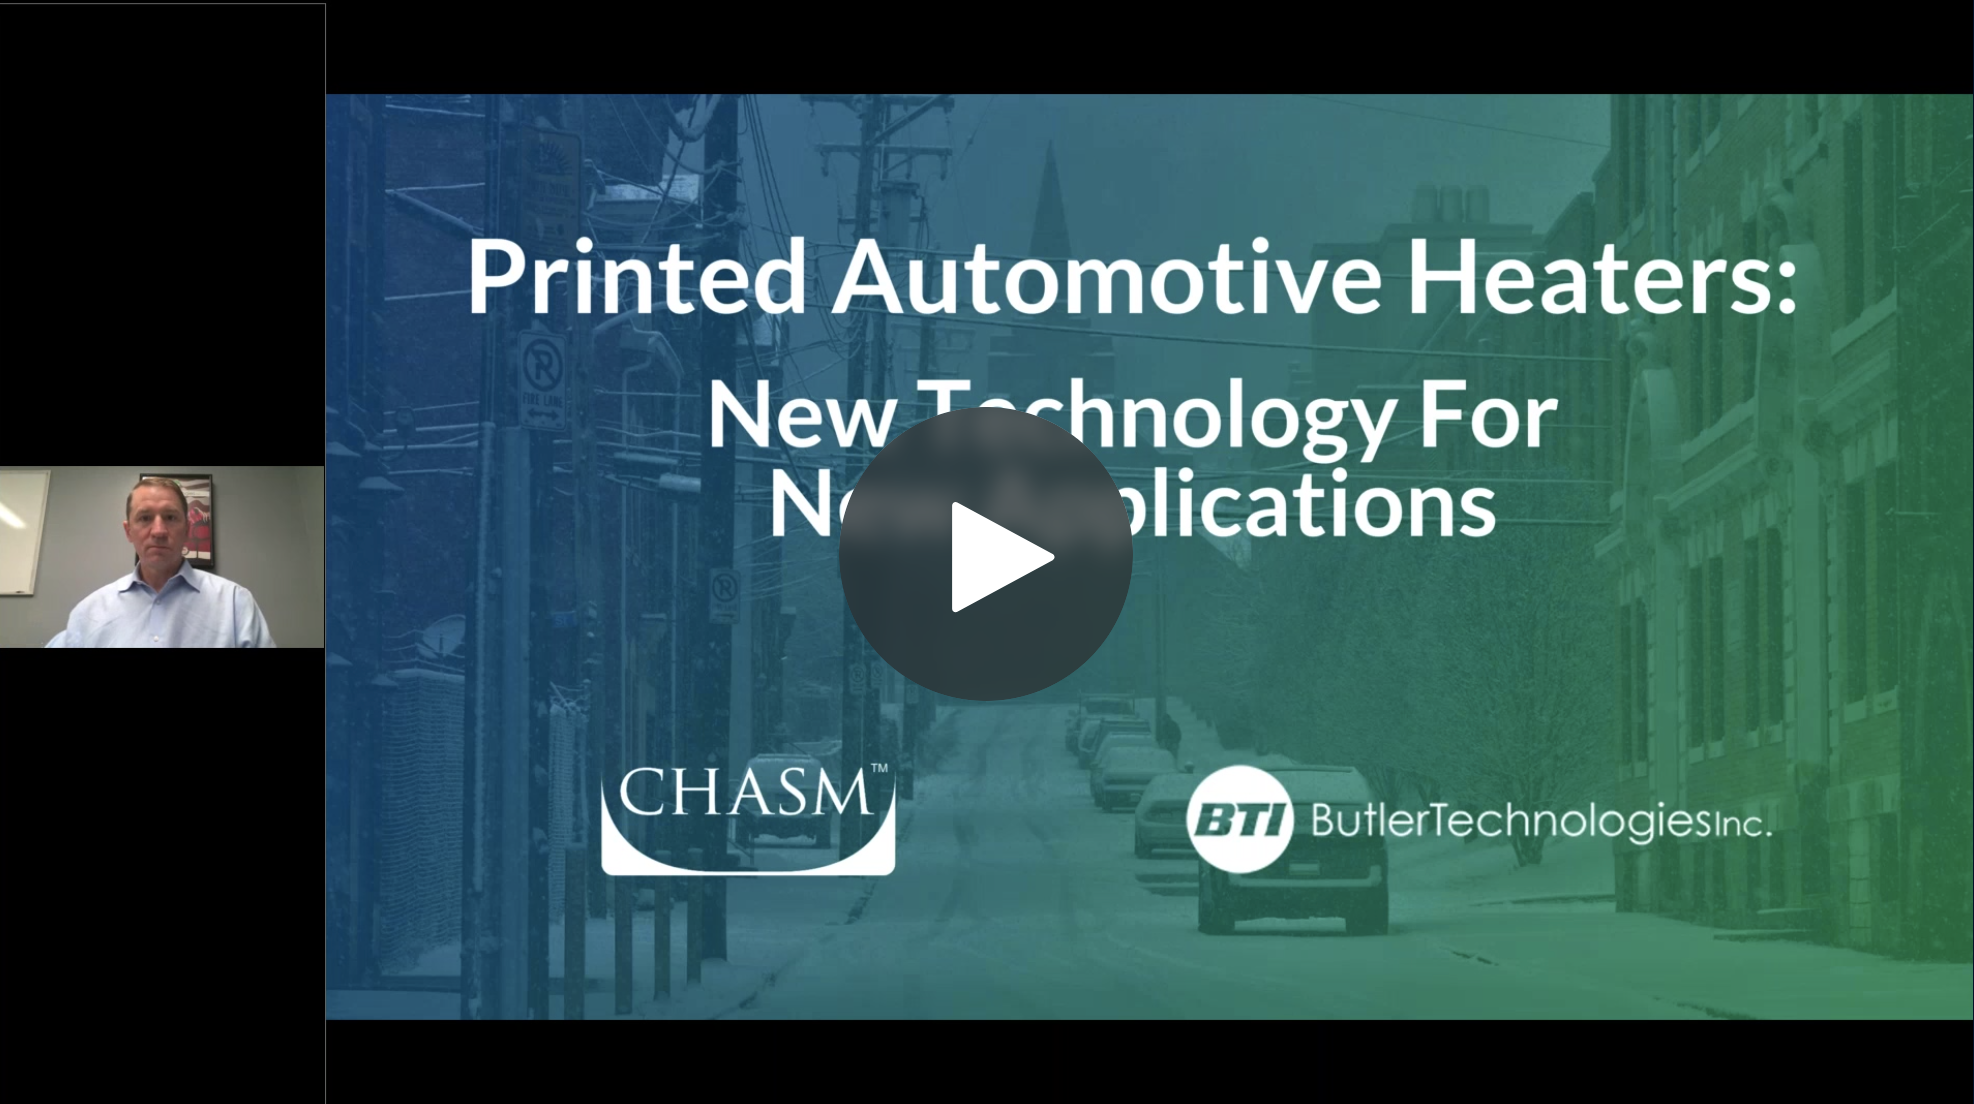 Printed Automotive Heaters: New Technology